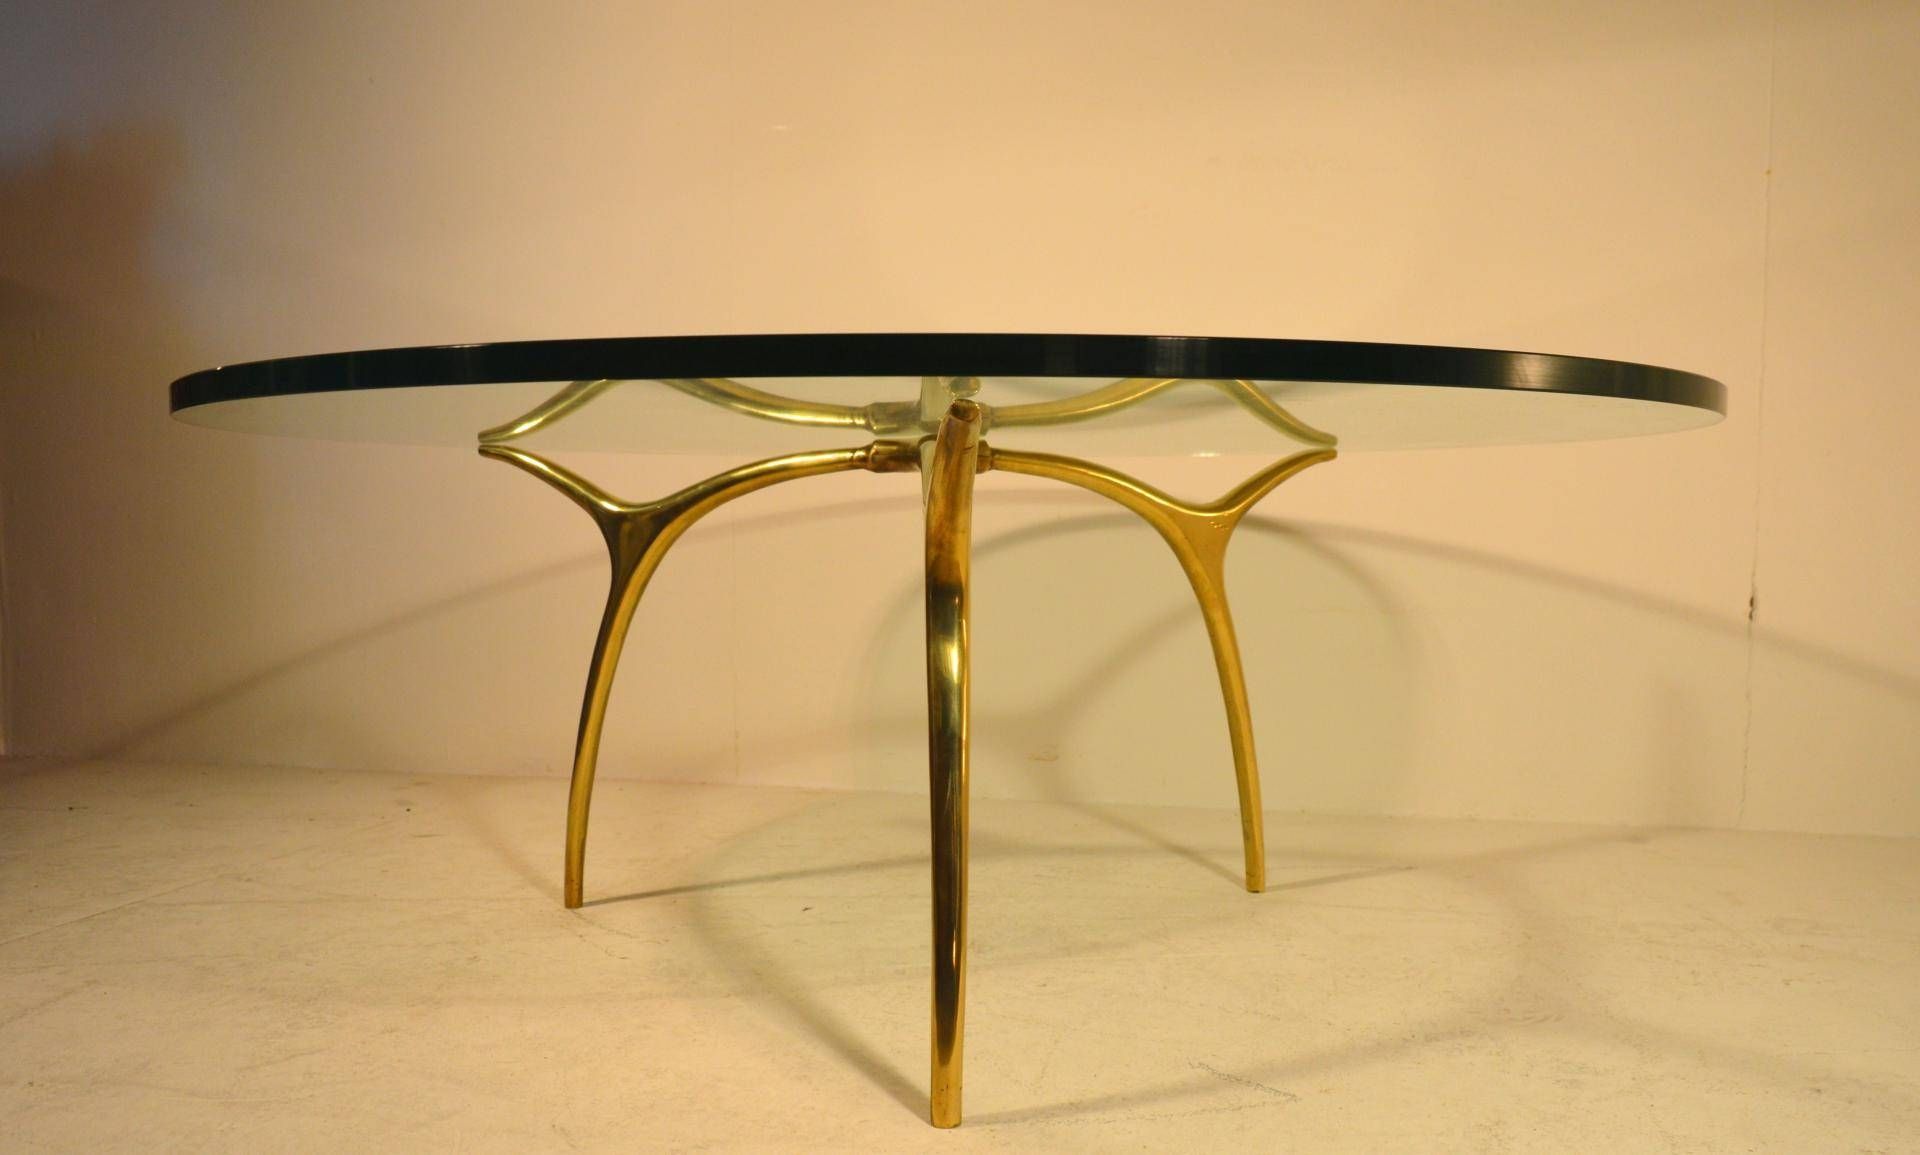 Bronze And Glass Coffee Tablekouloufi For Ets Vanderborght Inside Bronze And Glass Coffee Tables (View 15 of 30)